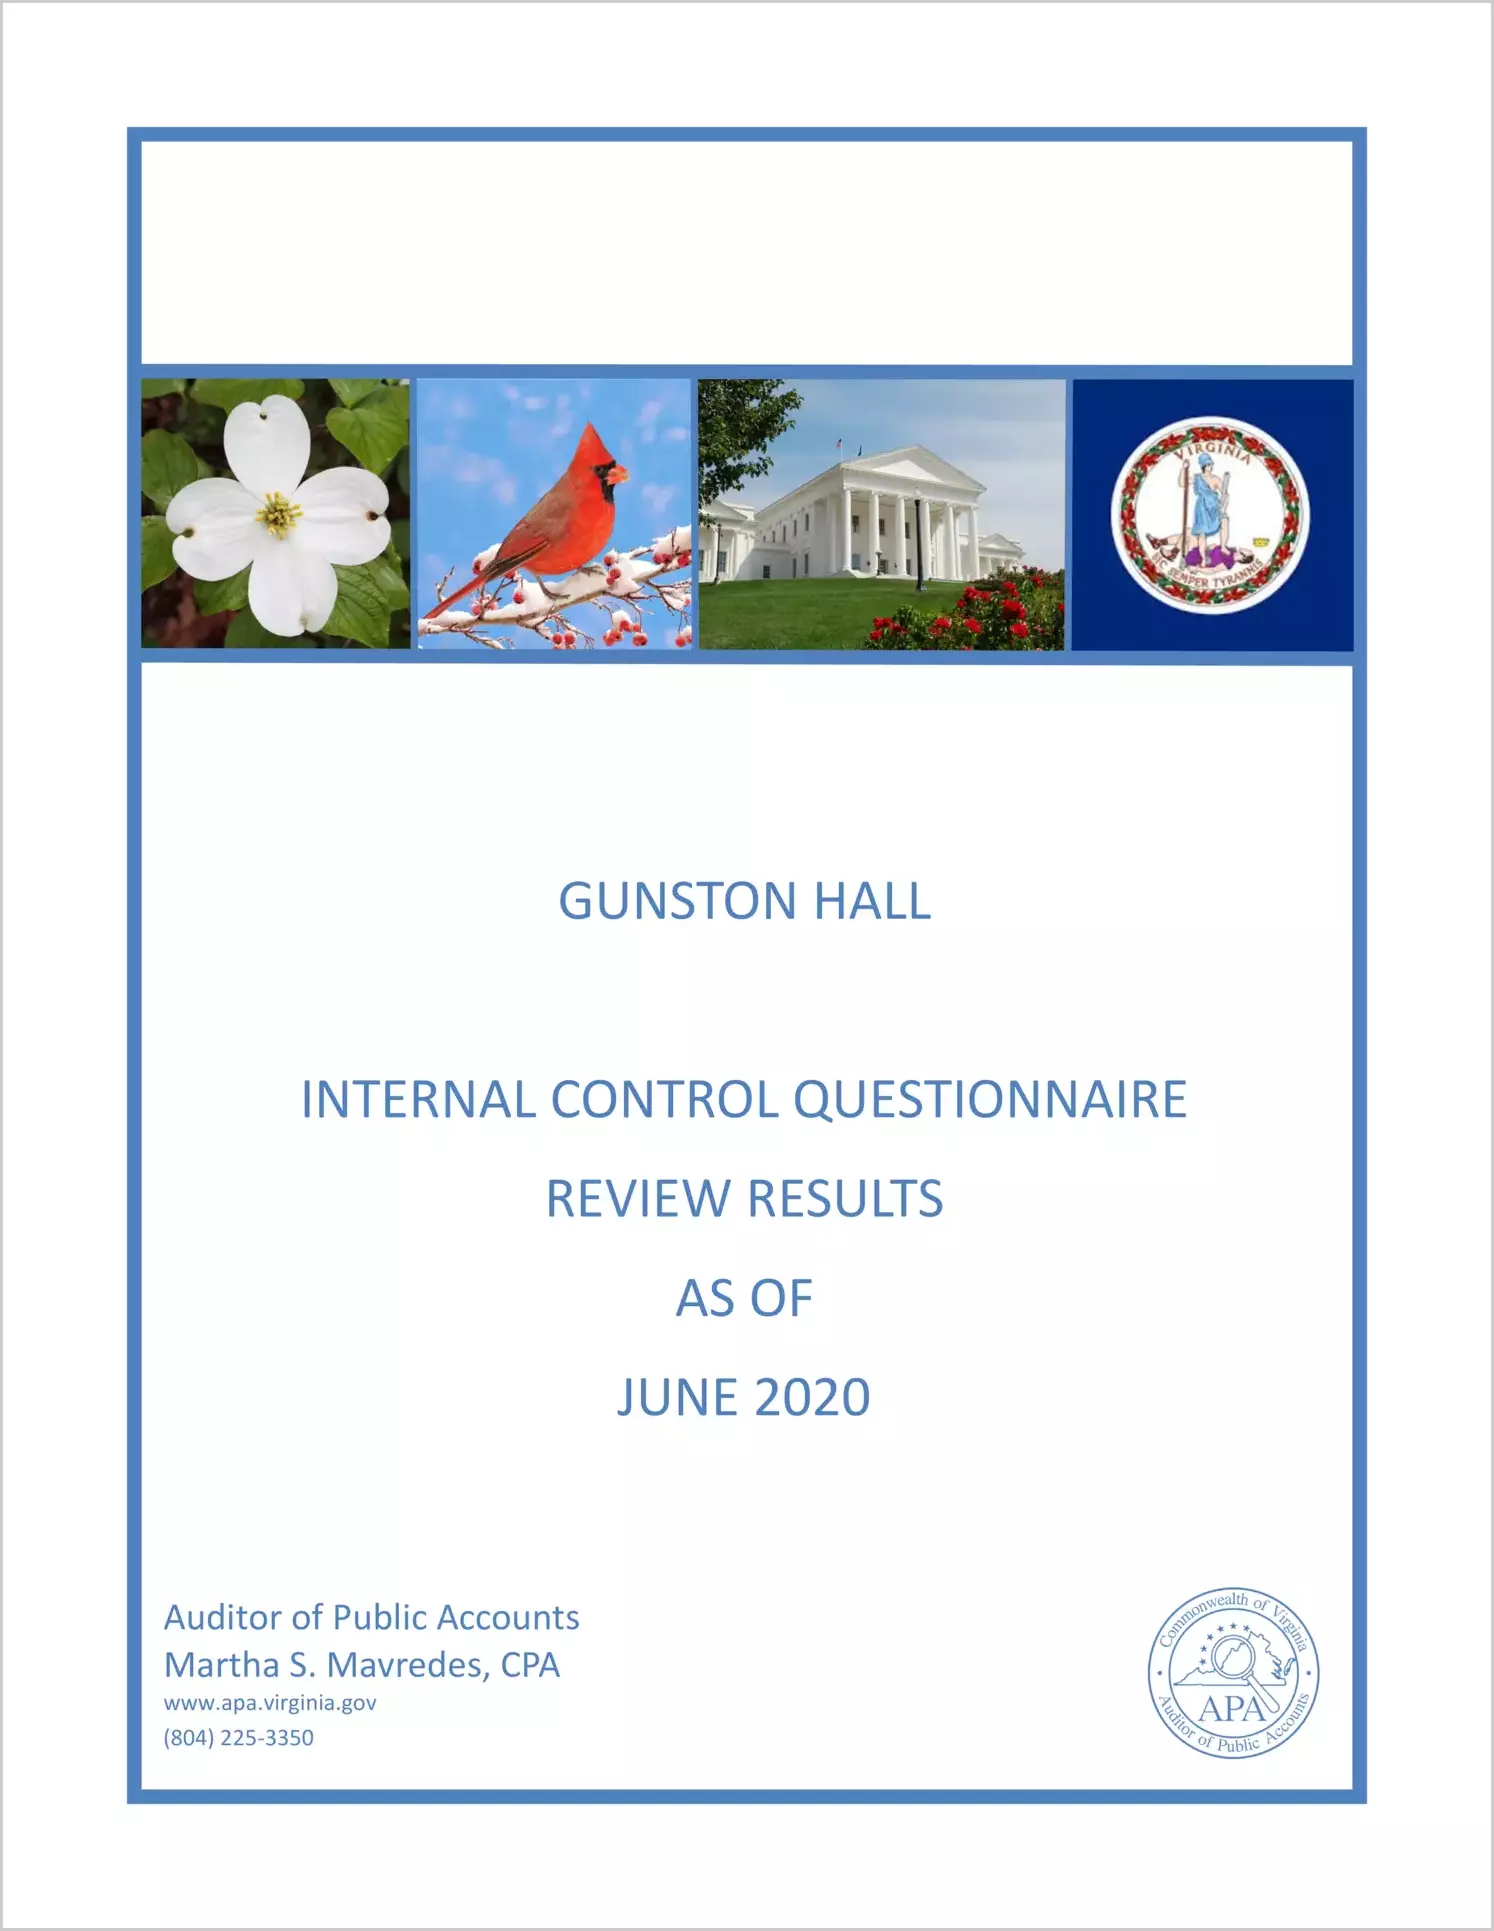 Gunston Hall Internal Control Questionnaire Review Results as of June 2020